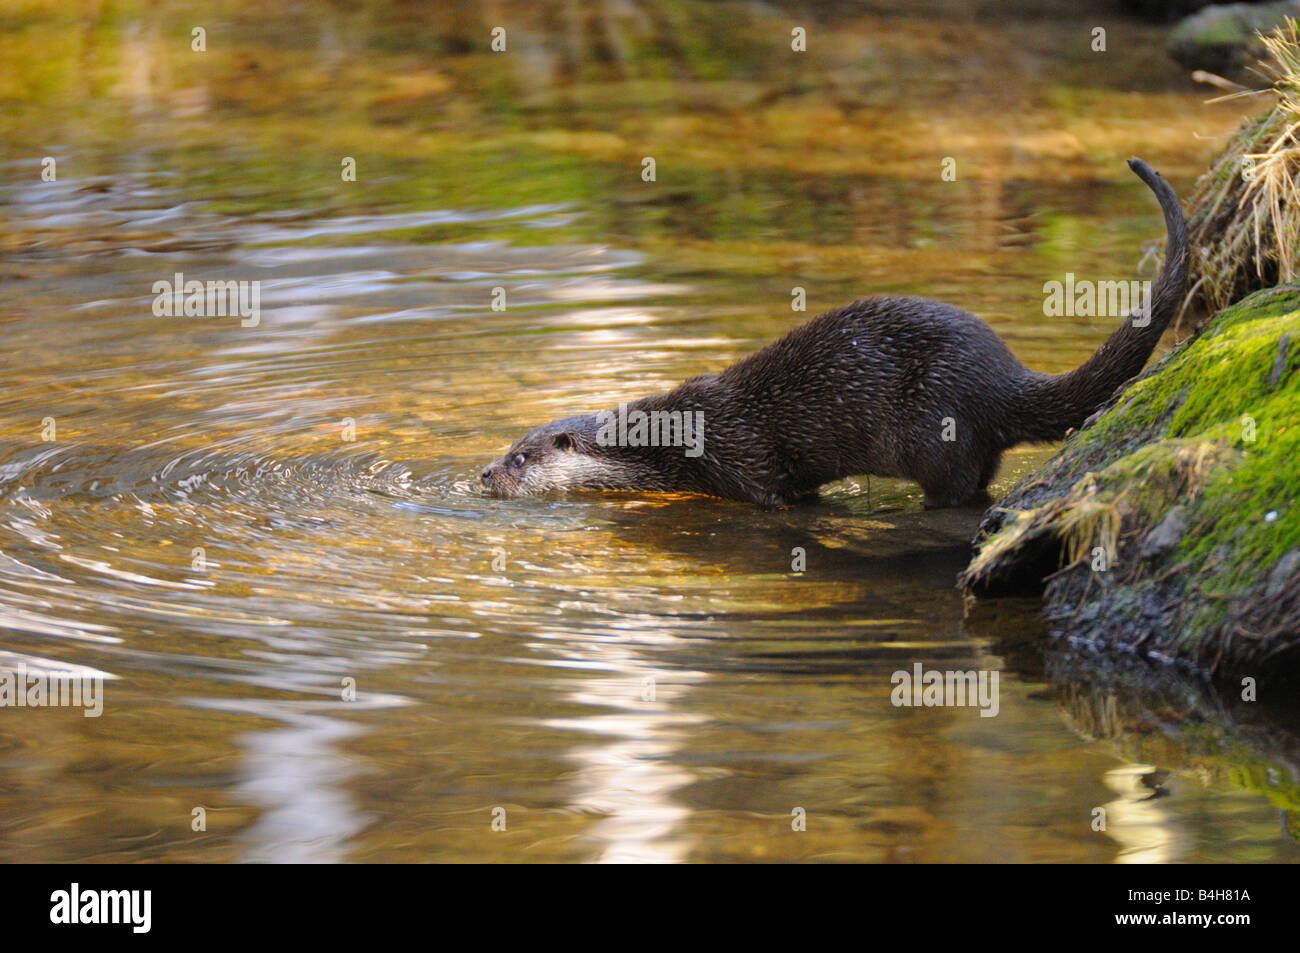 River Otter (Lutra lutra) in river Stock Photo